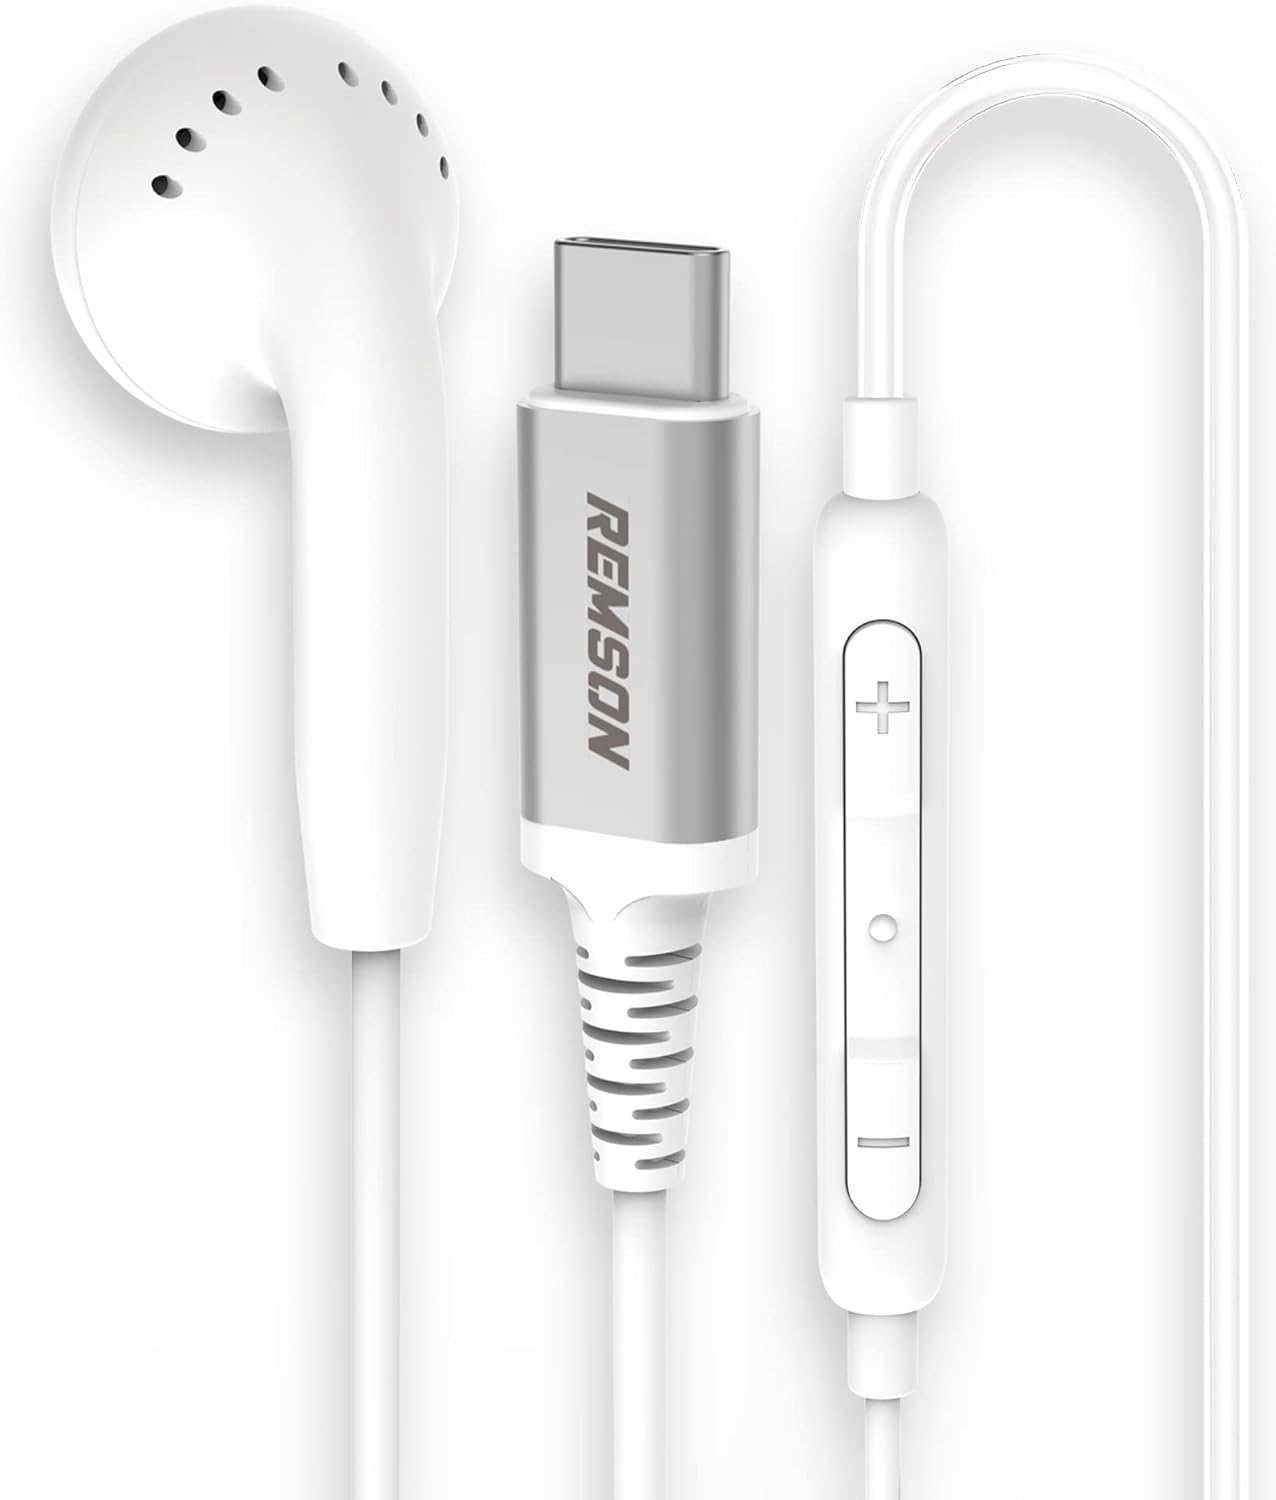 Remson Wired Mono Single USB-C Connector Headphone/Earphone/Earbud with In-Line Remote - White